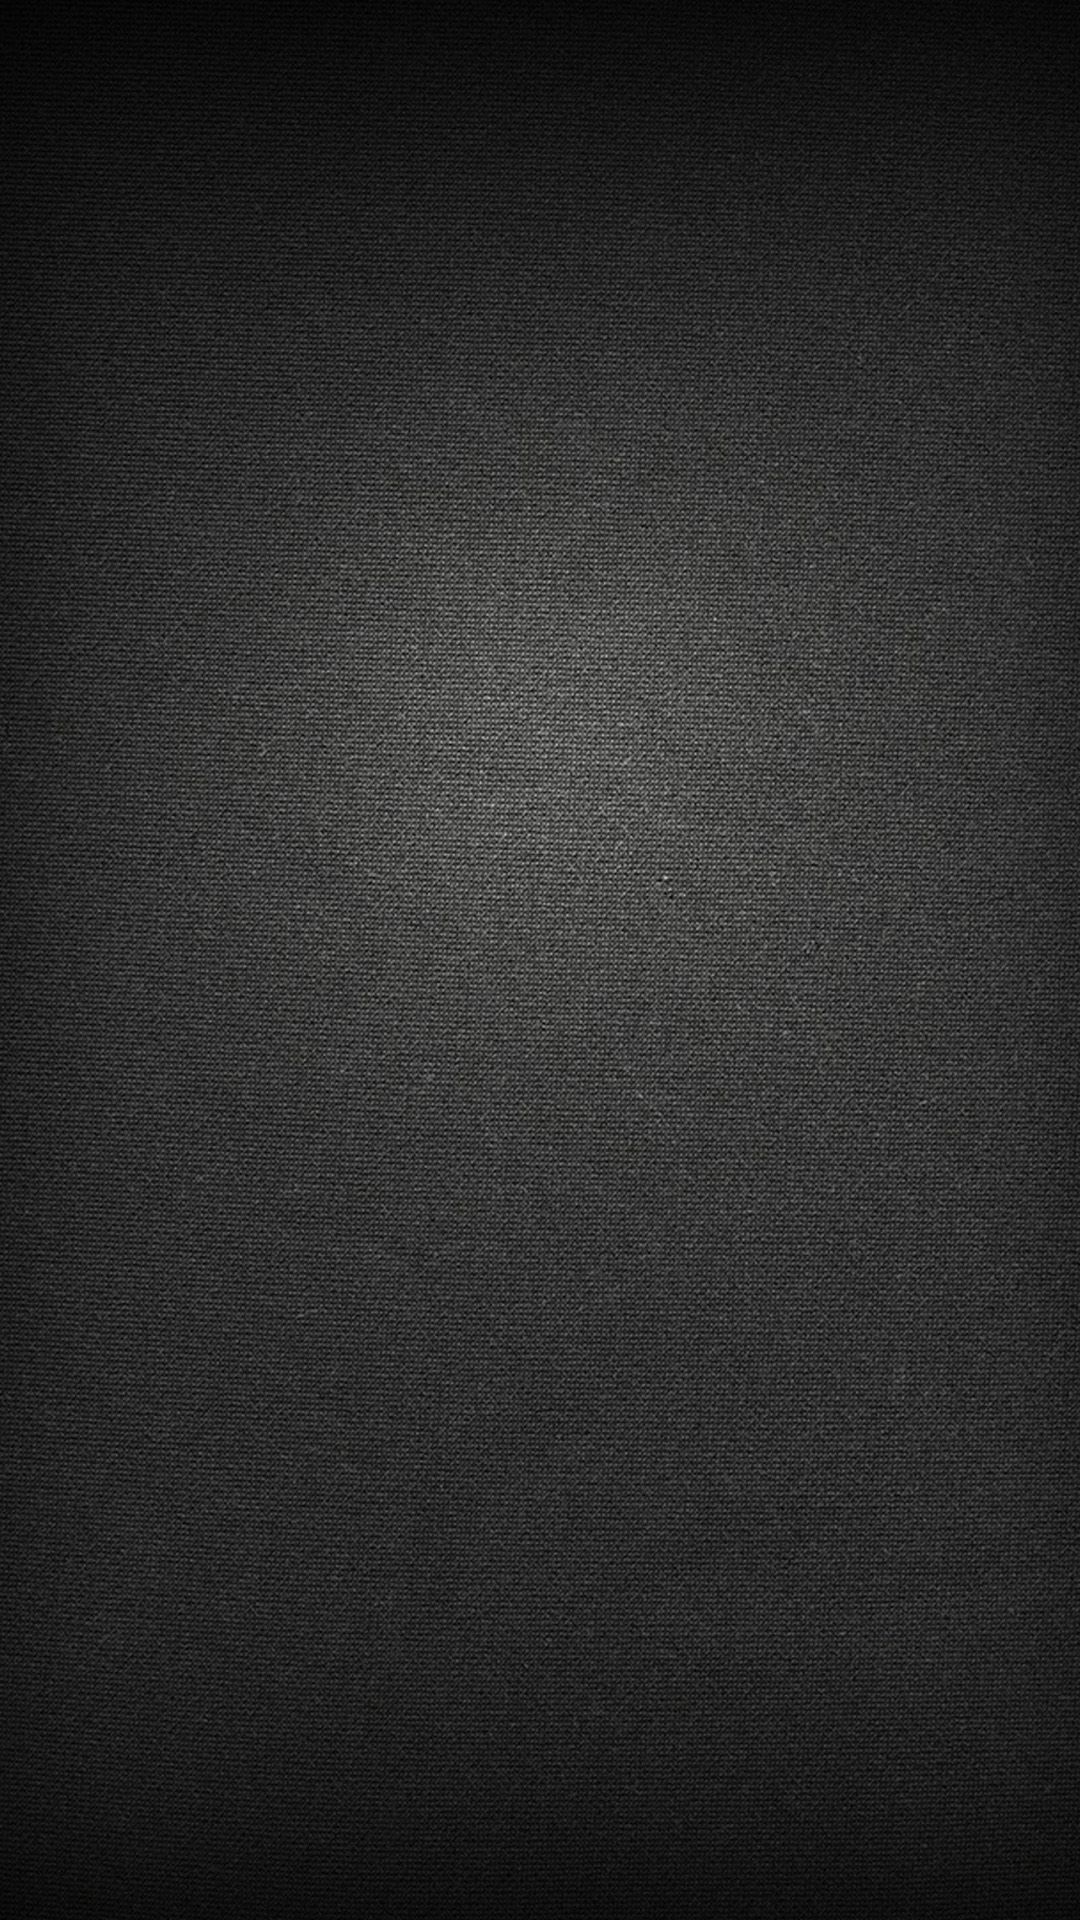 HD Android Black Carbon Wallpapers - Wallpaper Cave